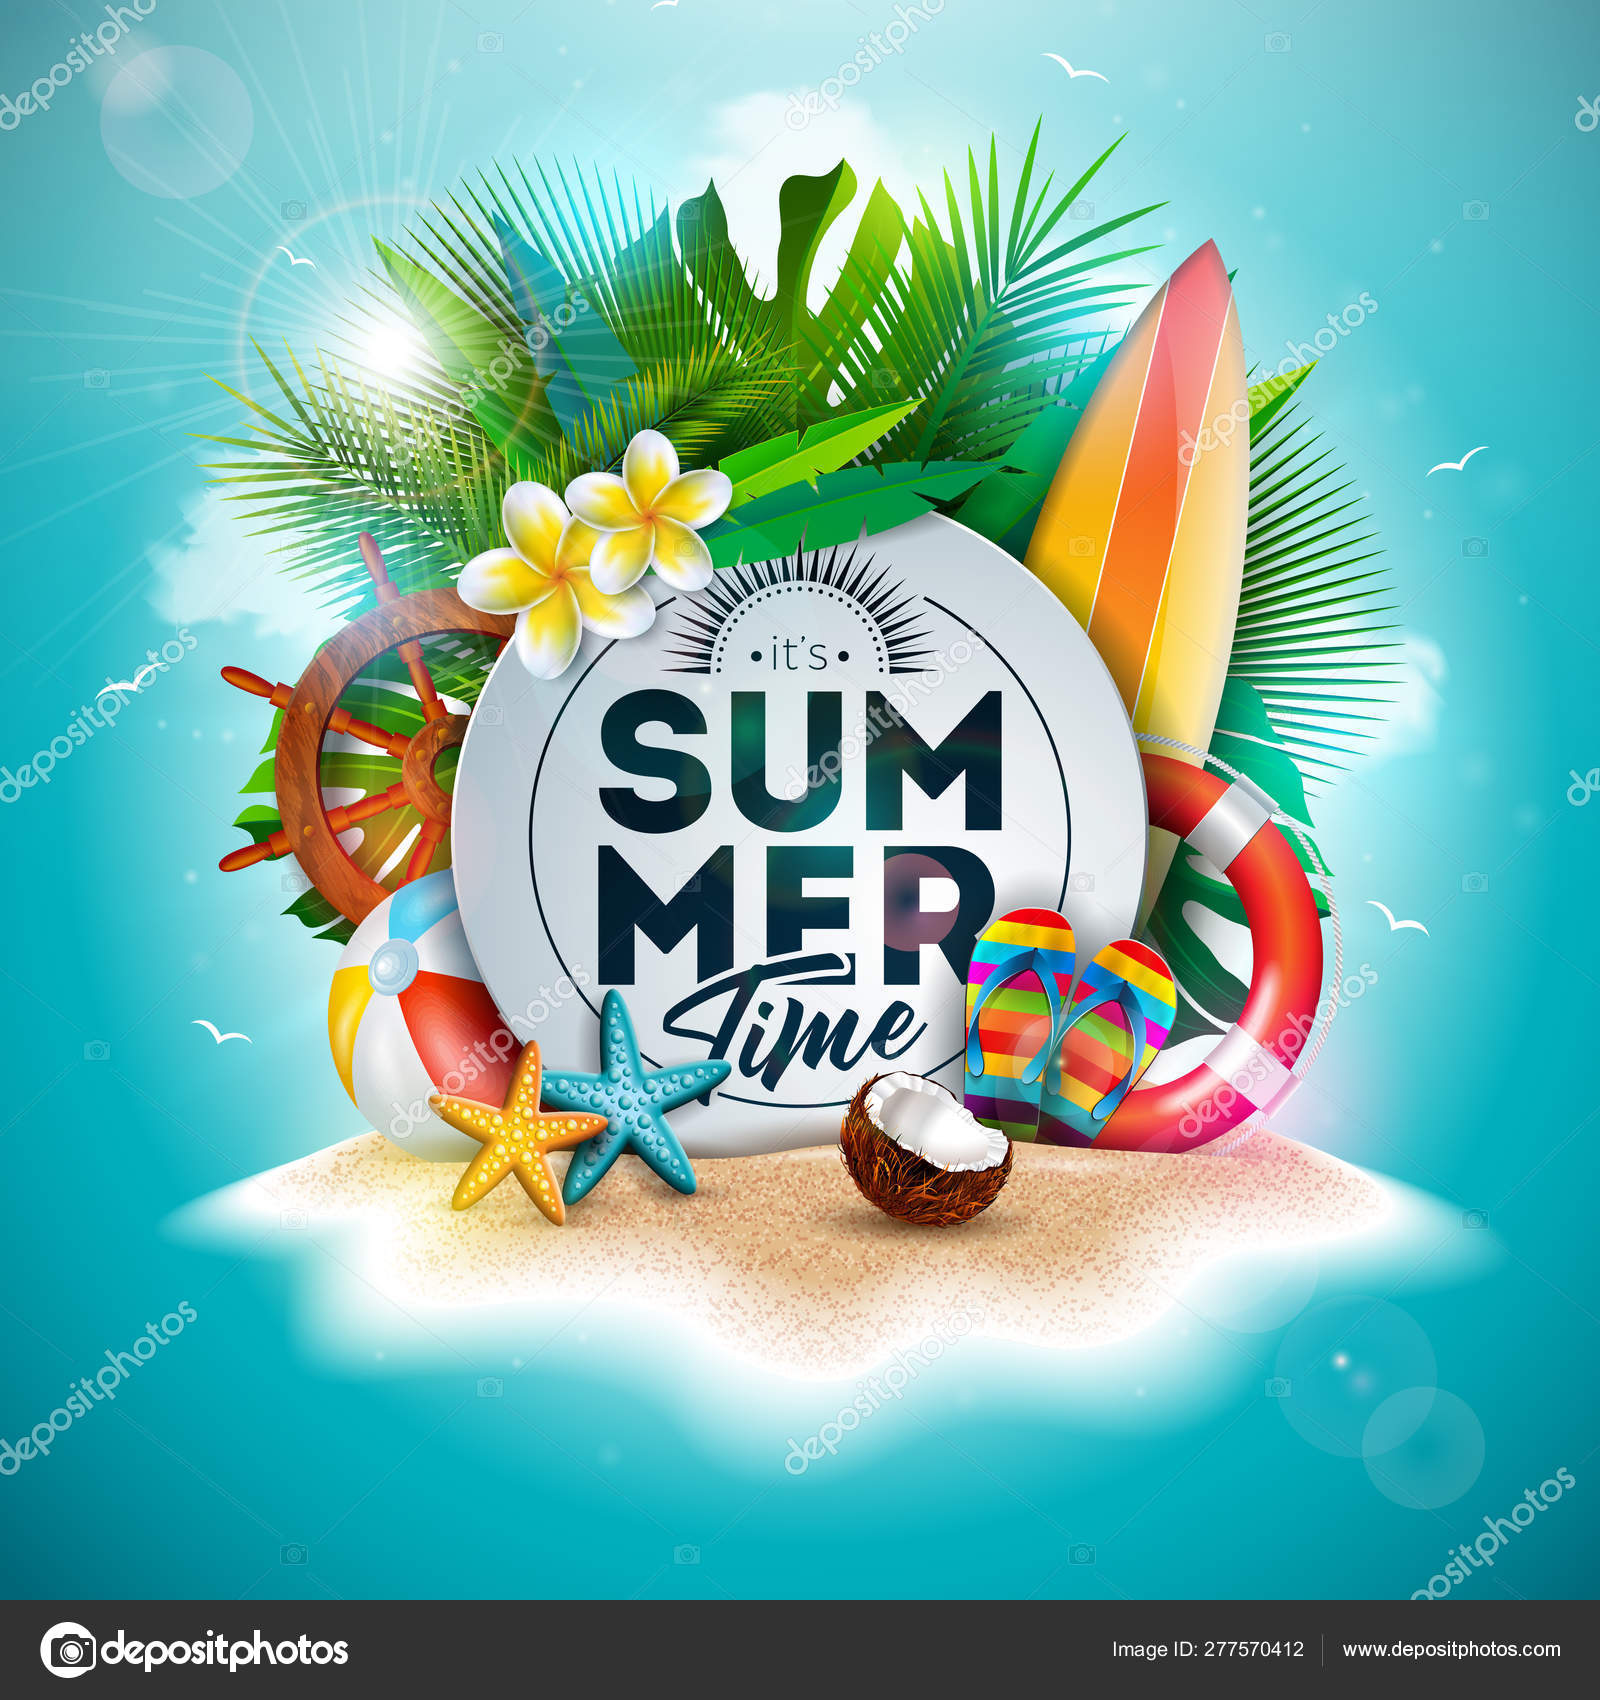 Free Vector  Summer time text on illustrated beach